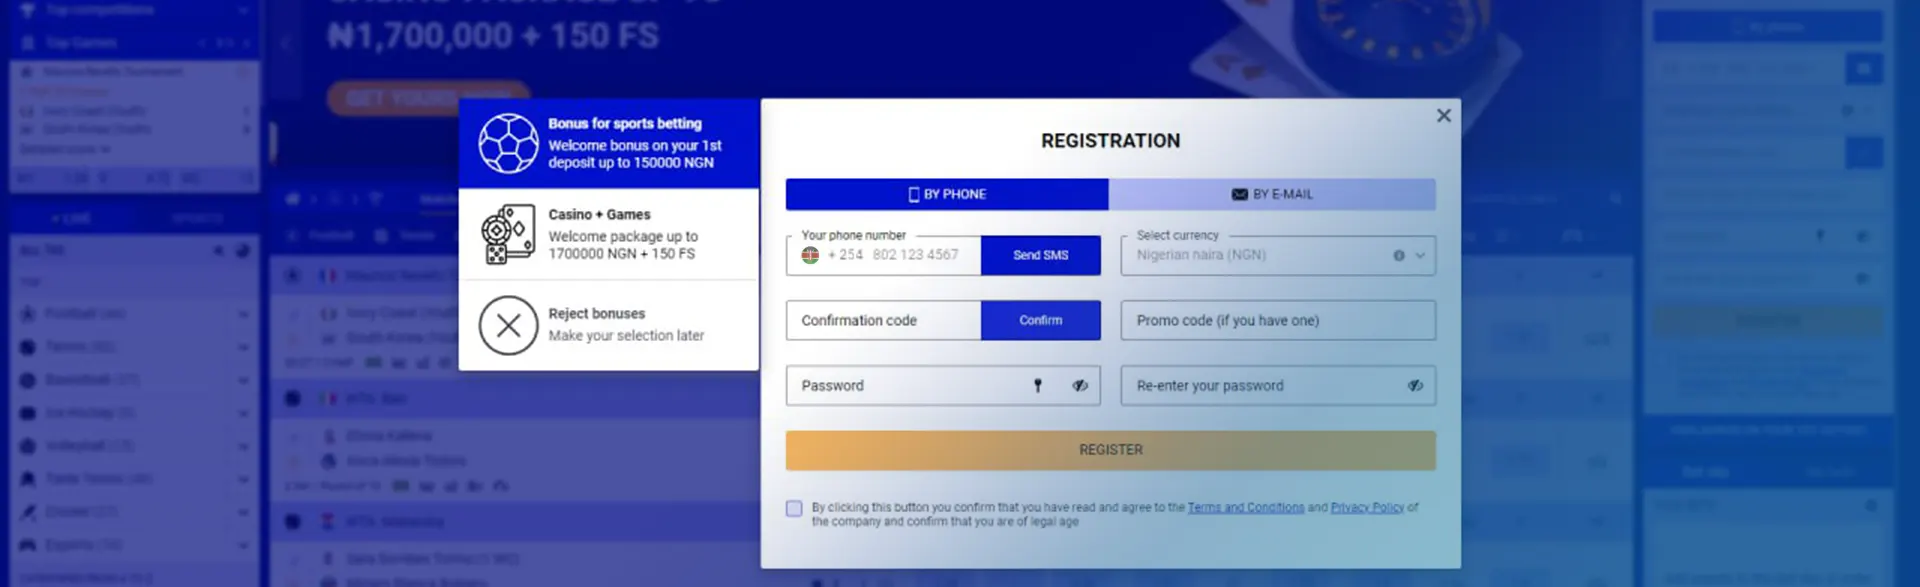 Registration field for players on the Paripesa betting site.